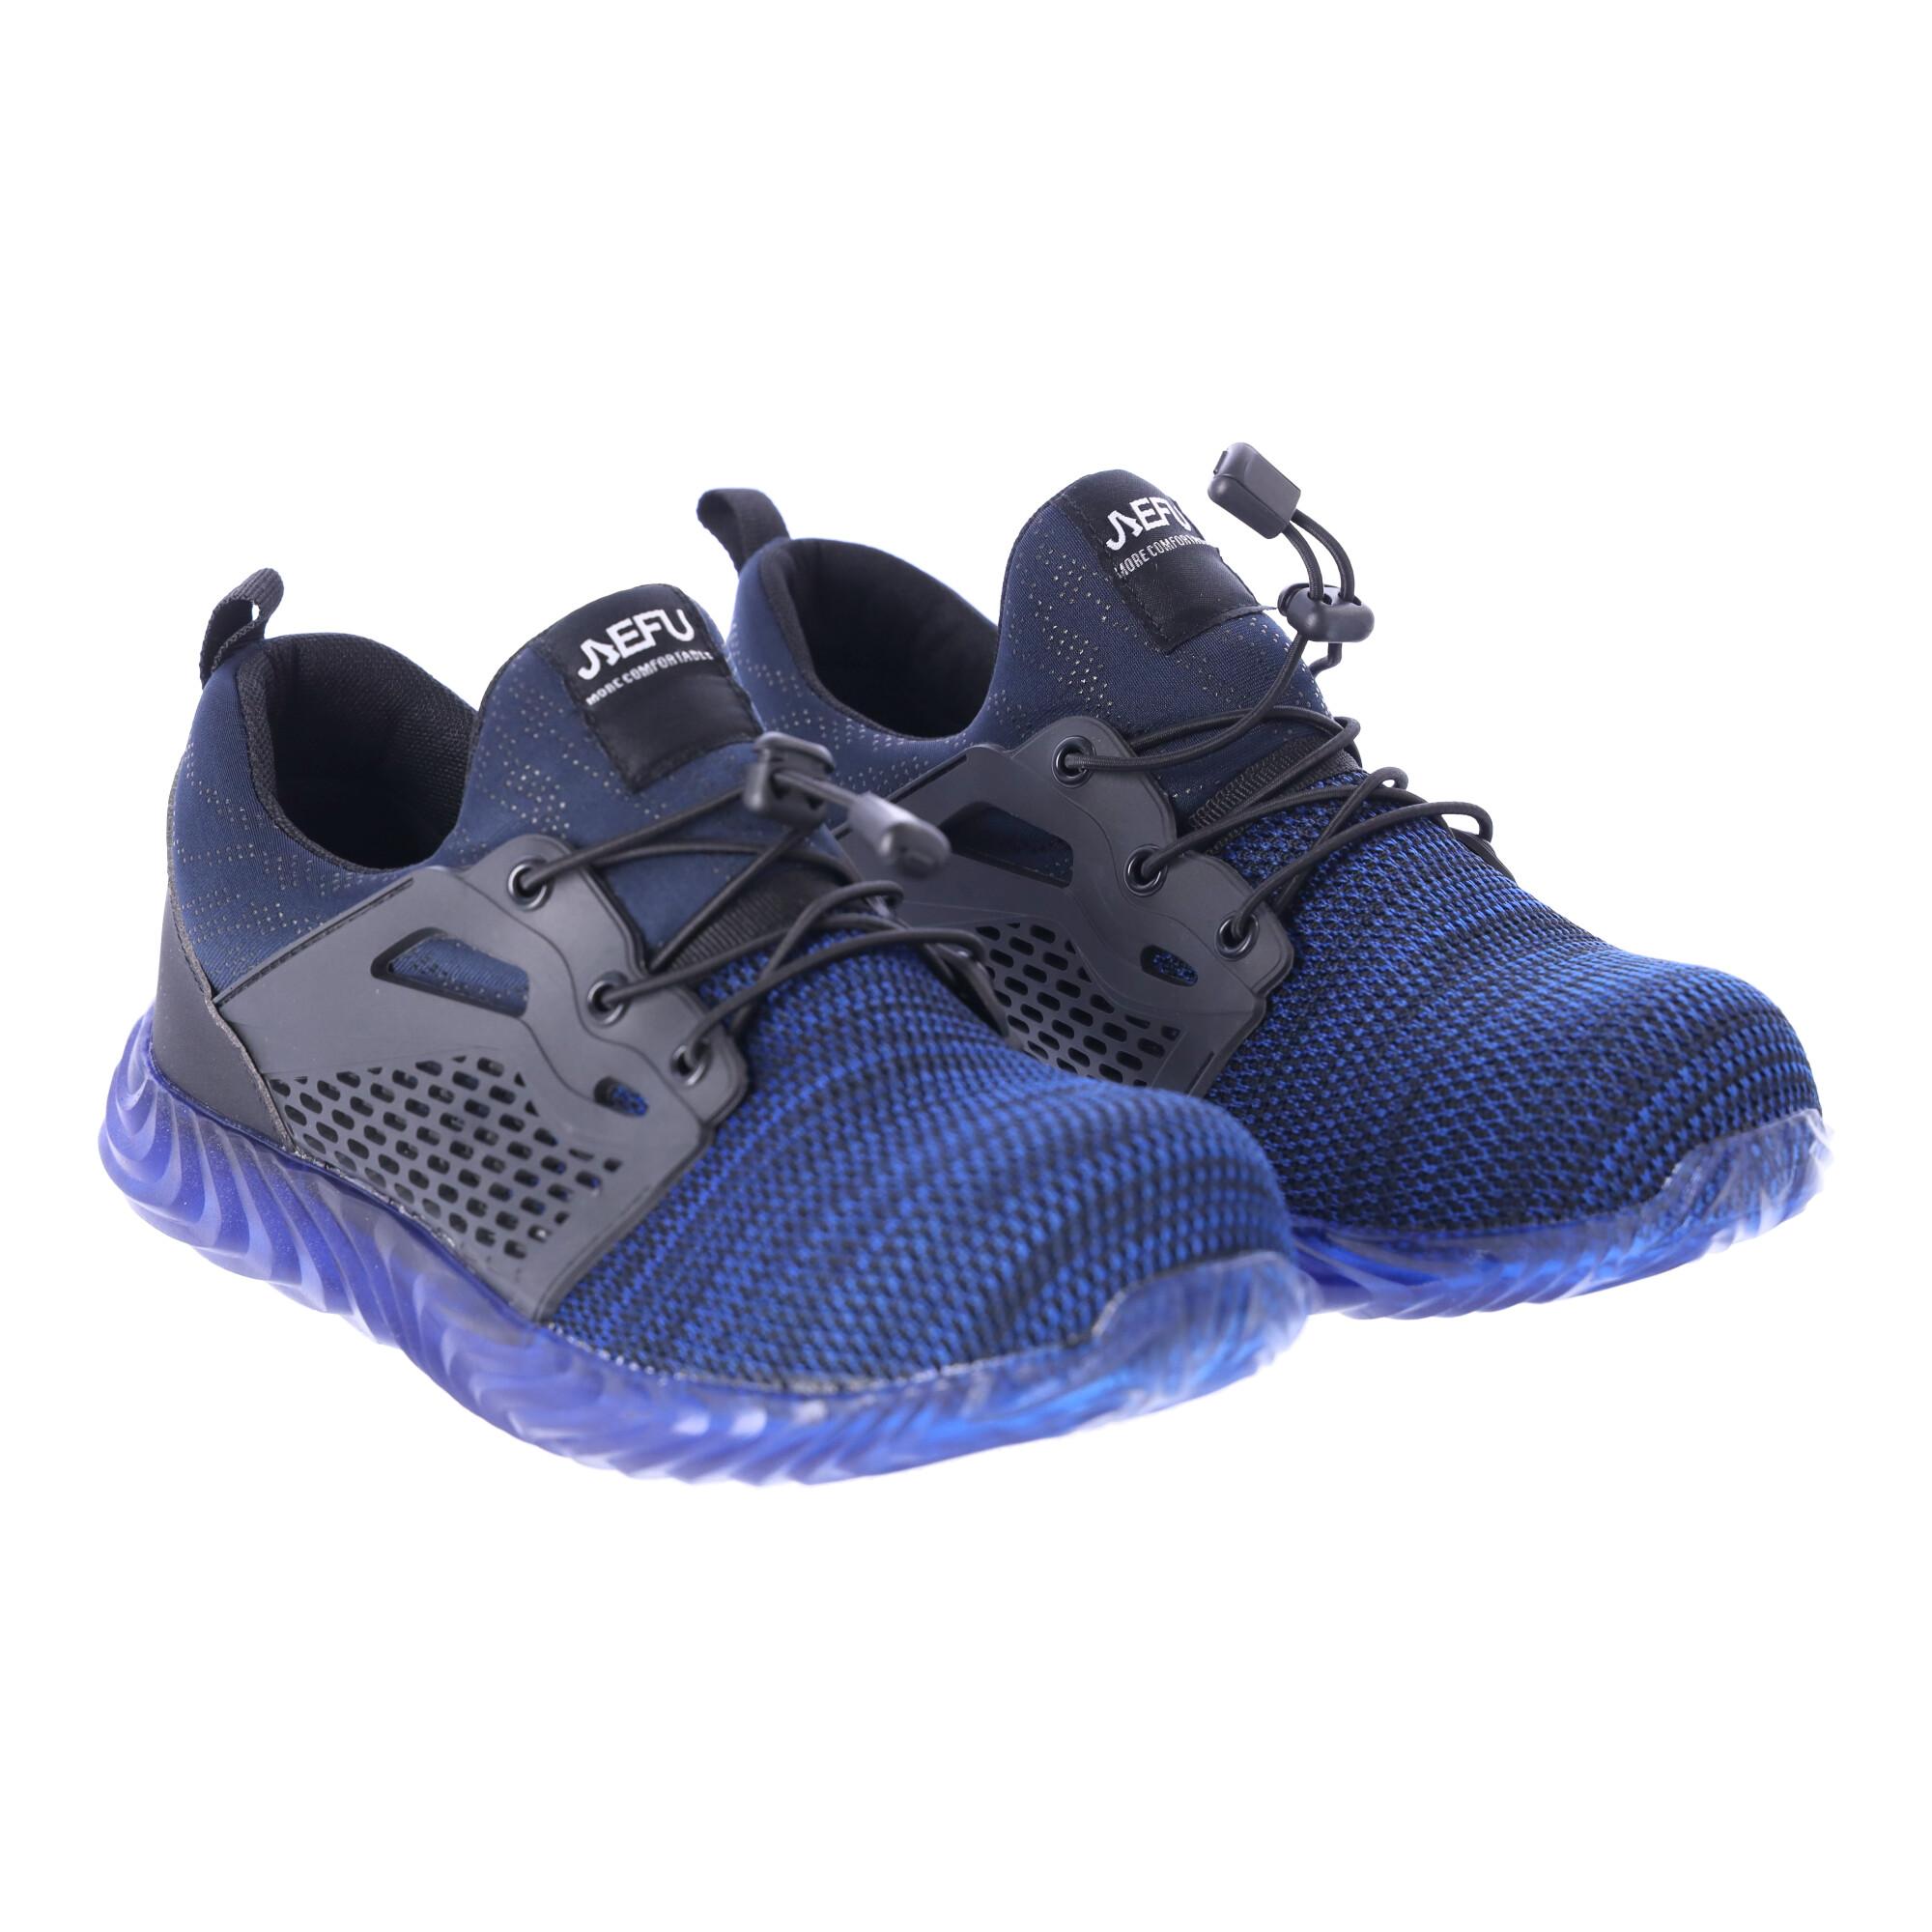 Work safety shoes "44" - navy blue